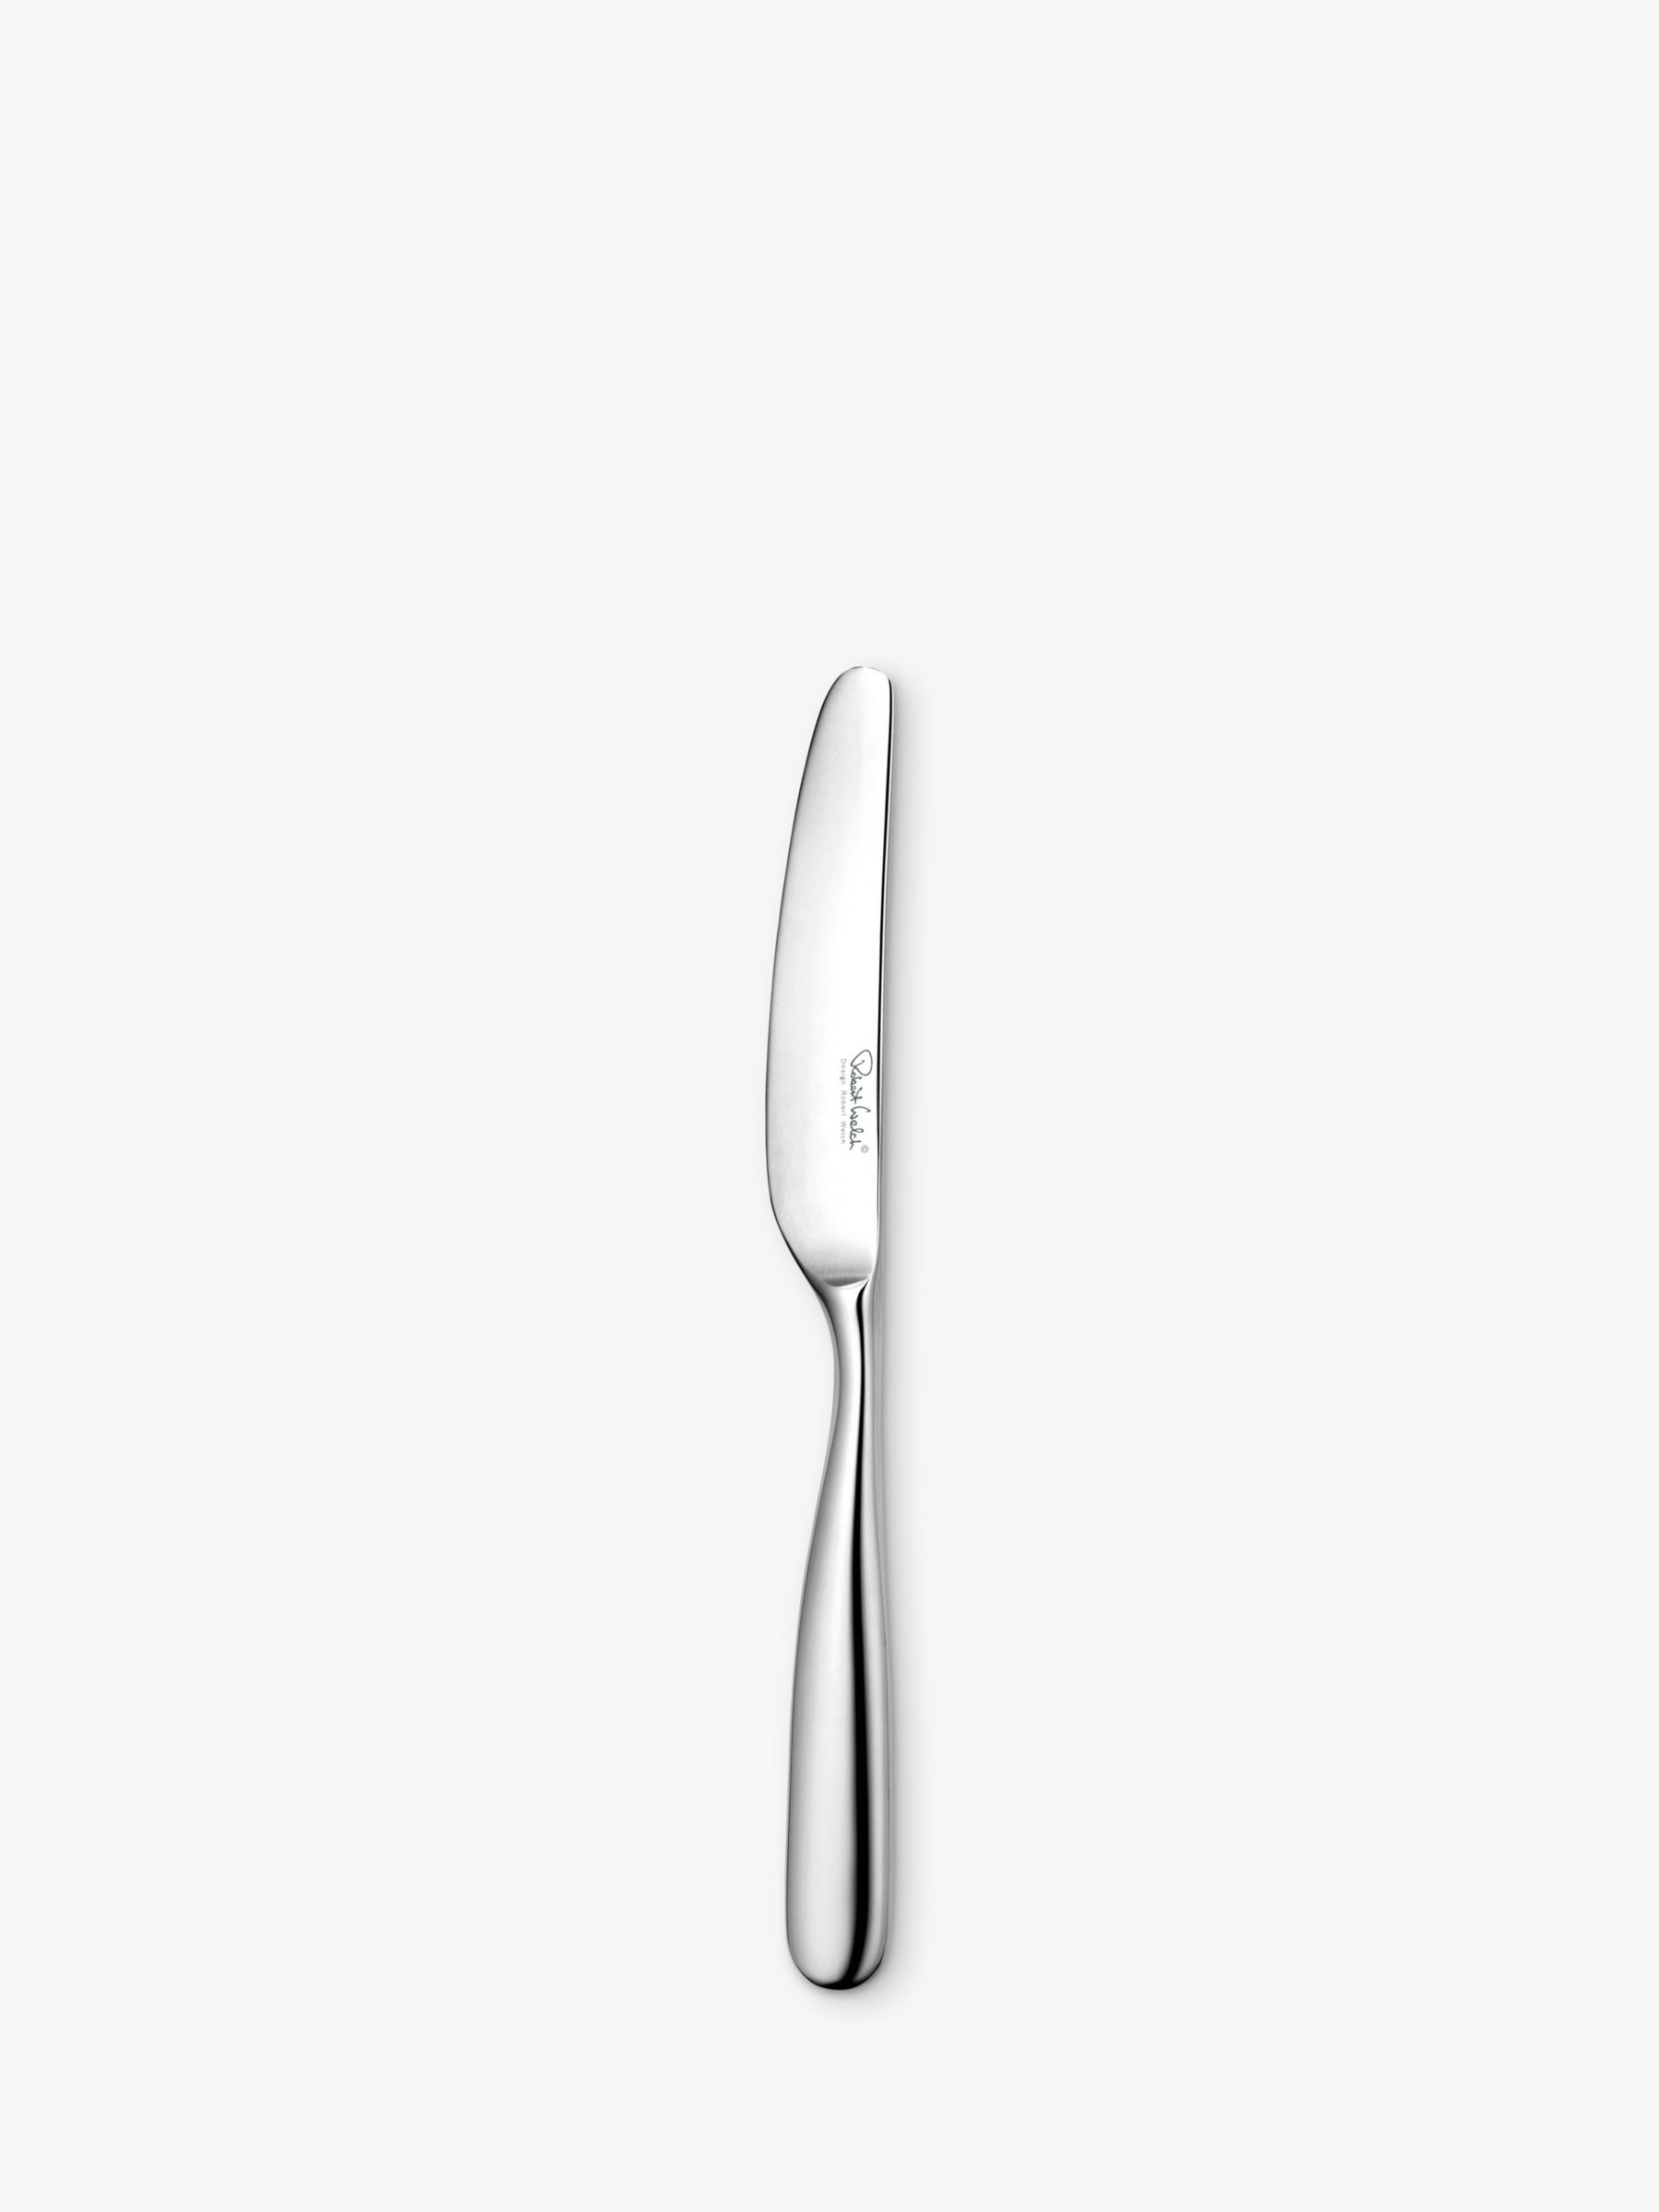 Robert Welch Stanton Table Knife, Stainless Steel